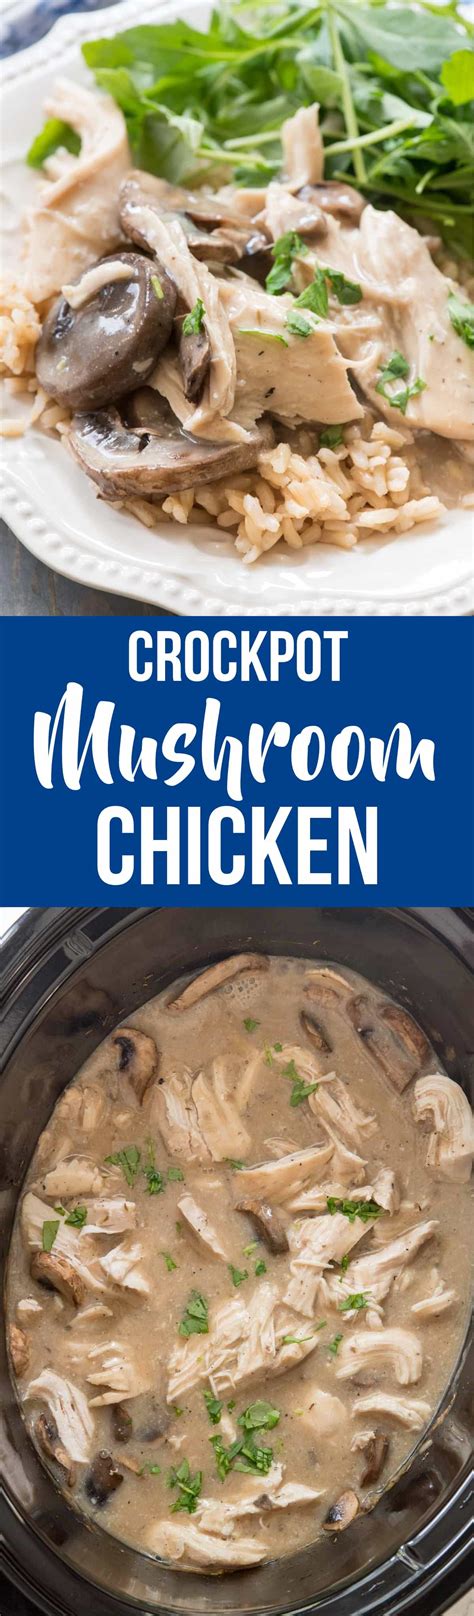 Crockpot Mushroom Chicken - this easy slow cooker chicken recipe is a quick and delicious way to ...